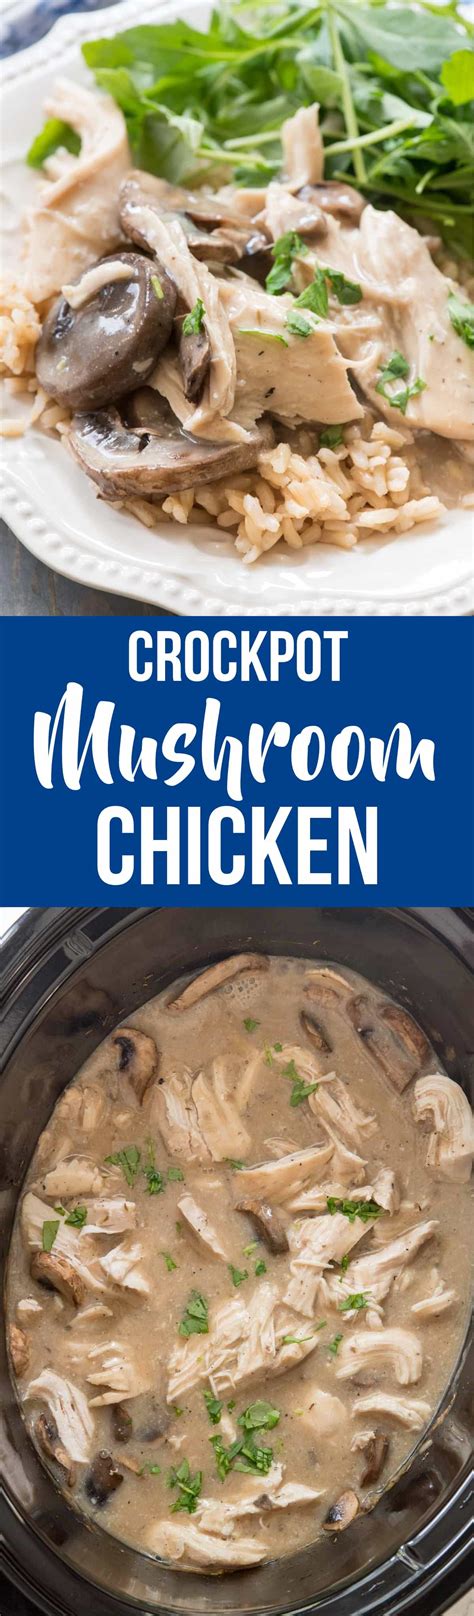 Crockpot Mushroom Chicken - this easy slow cooker chicken recipe is a quick and delicious way to ...